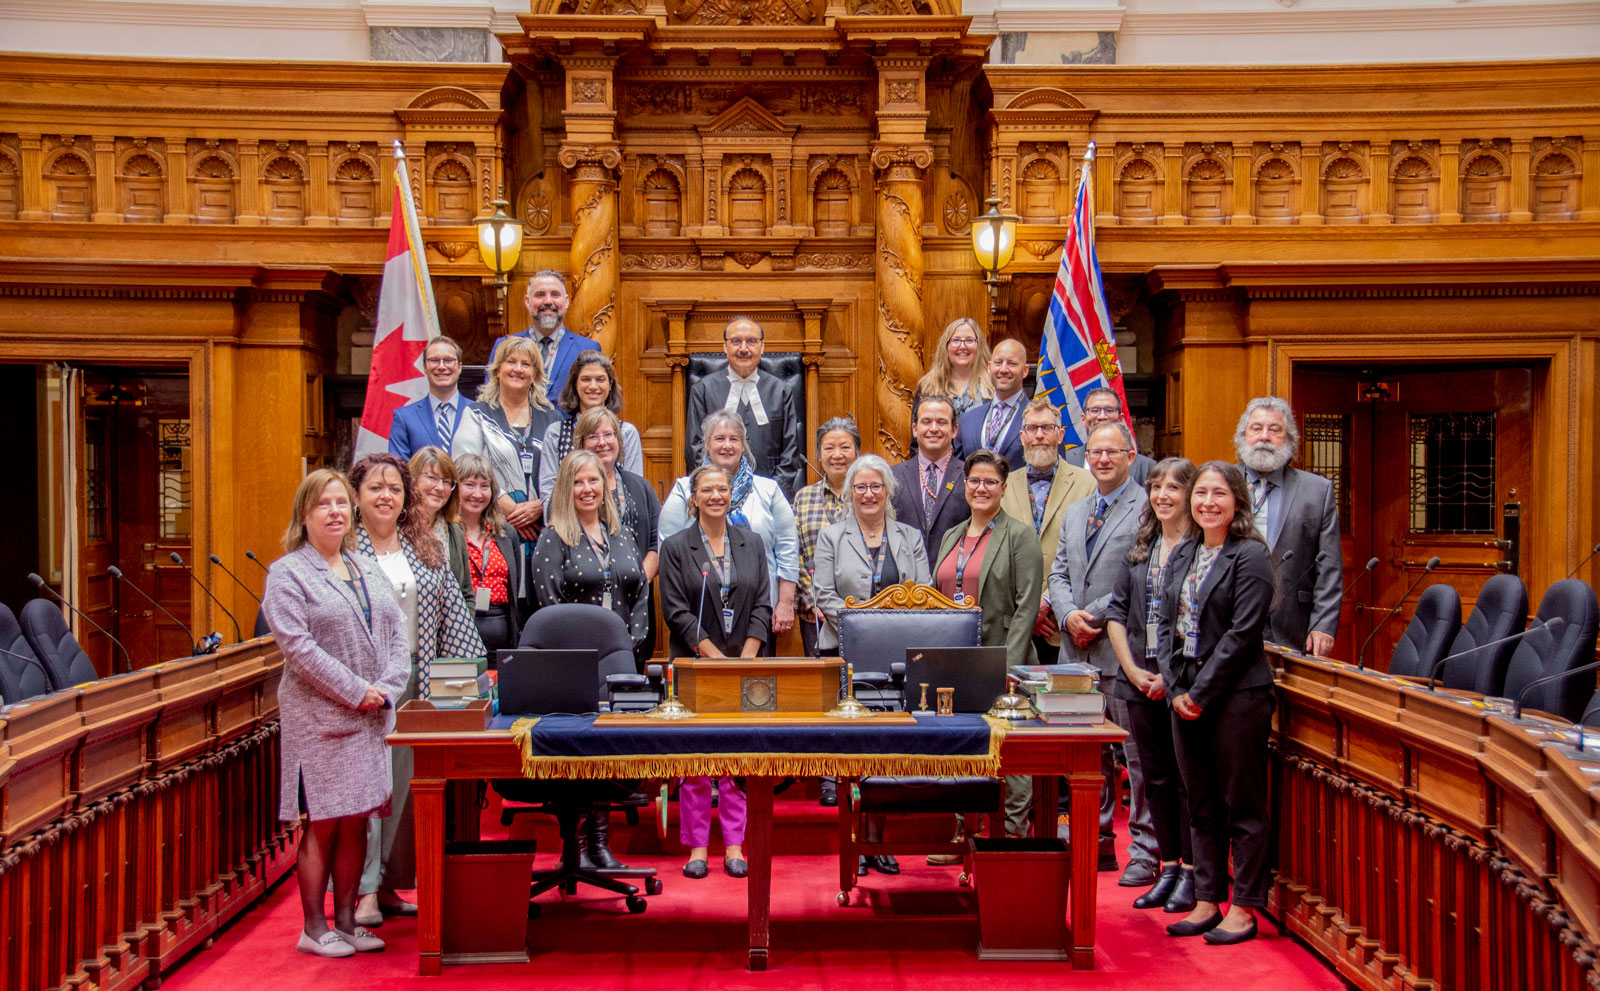 BC Teachers' Institute on Parliamentary Democracy group photo showing the Speaker, staff and 20 smiling participants